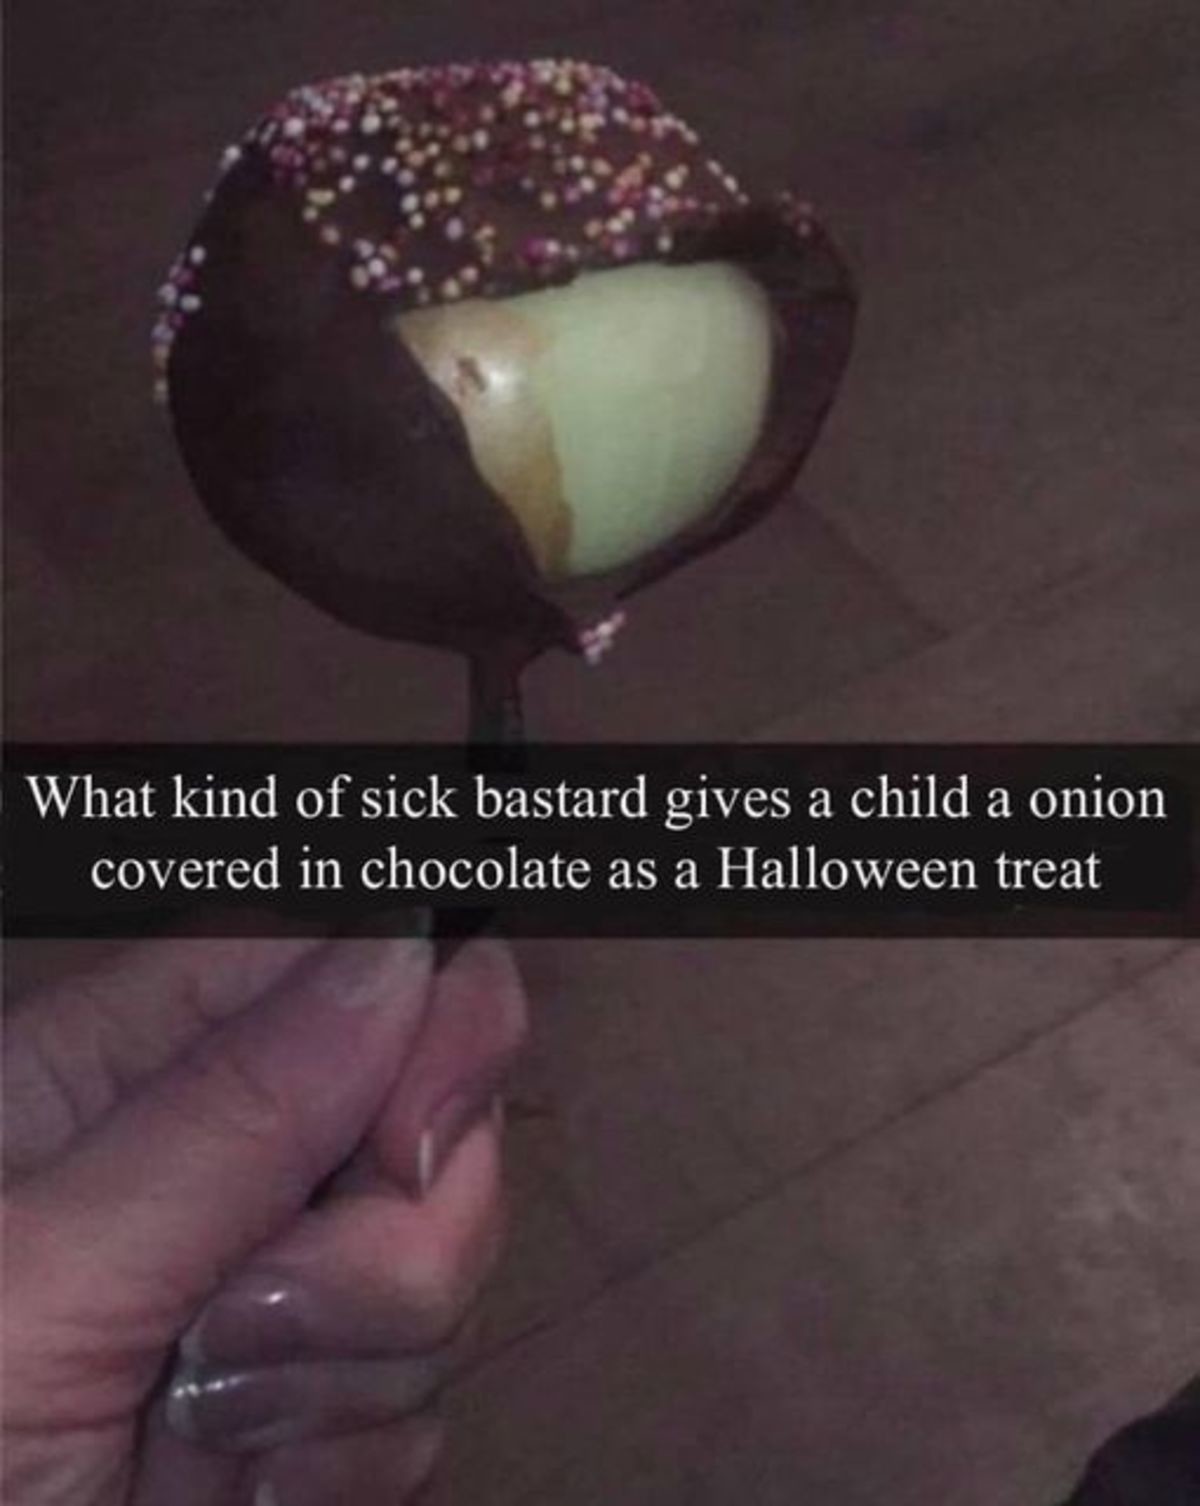 Shrek's Halloween Special. .. I would tbh I'd have full size bars next to it Trick or treat bitch ...I don't give out candy tho bc I have kids so we are out doing the thingComment edited at 